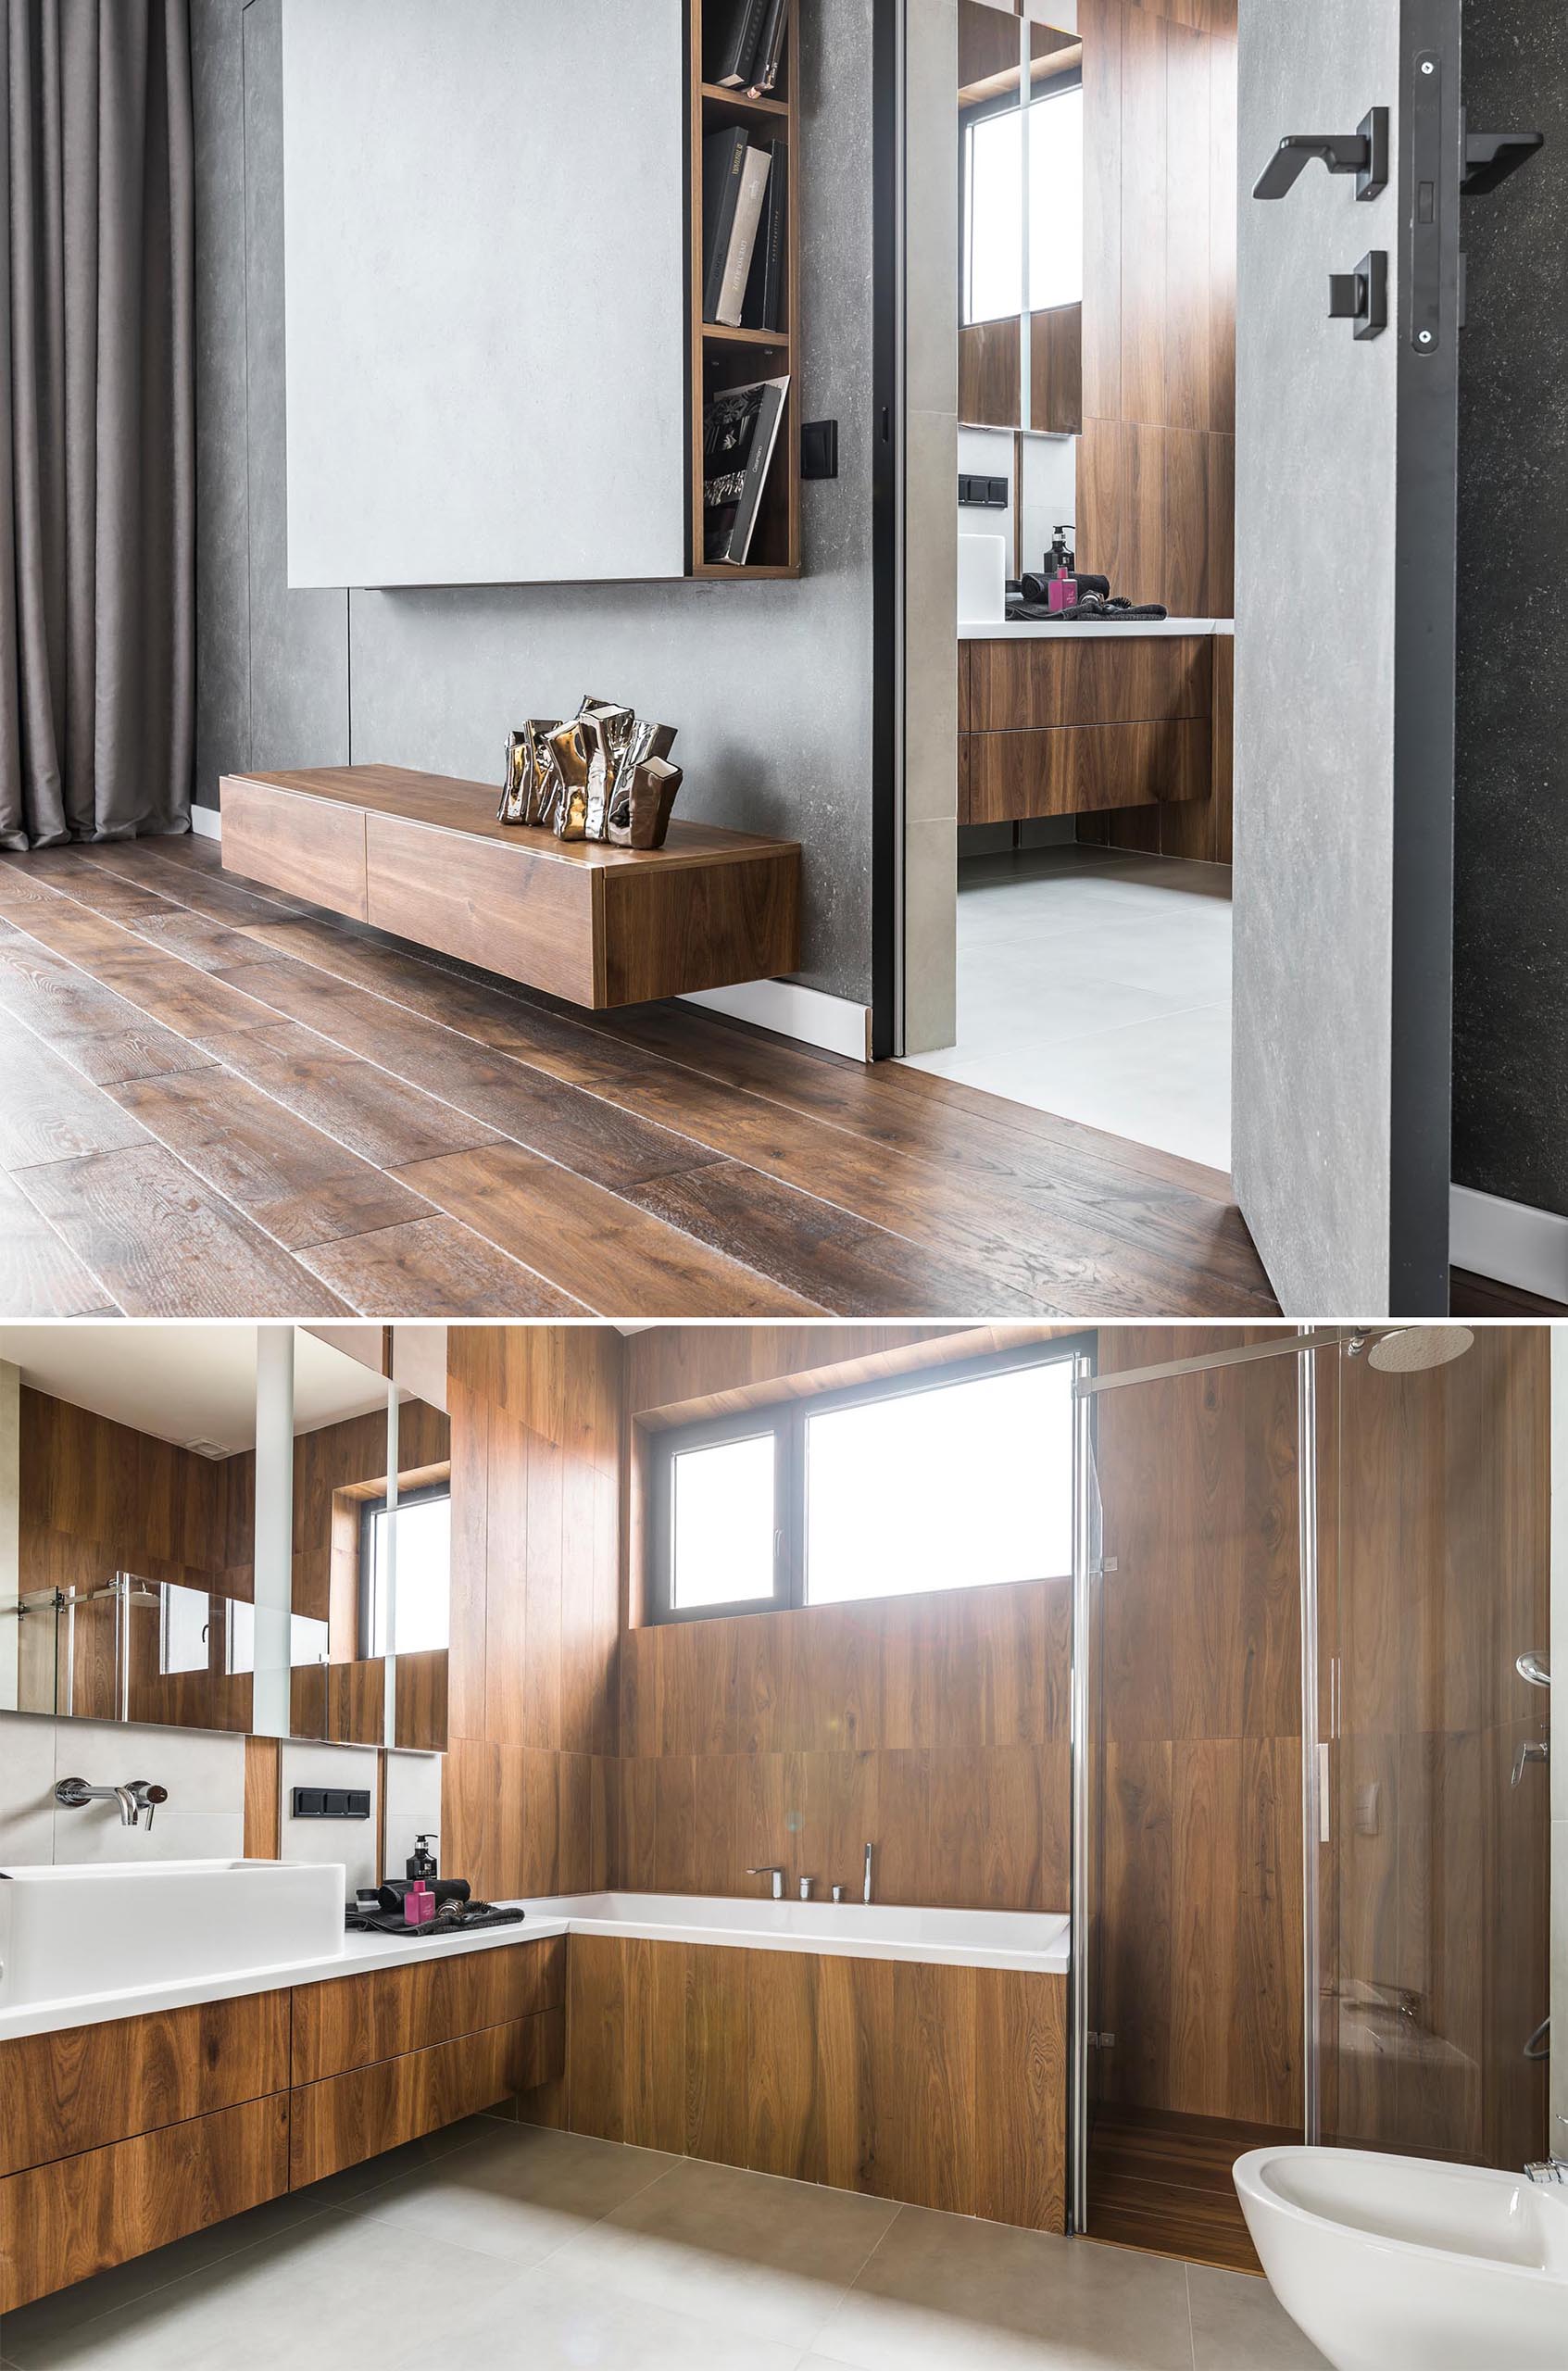 A modern wood-like tile covers a bathroom that also includes a white counter and sink.